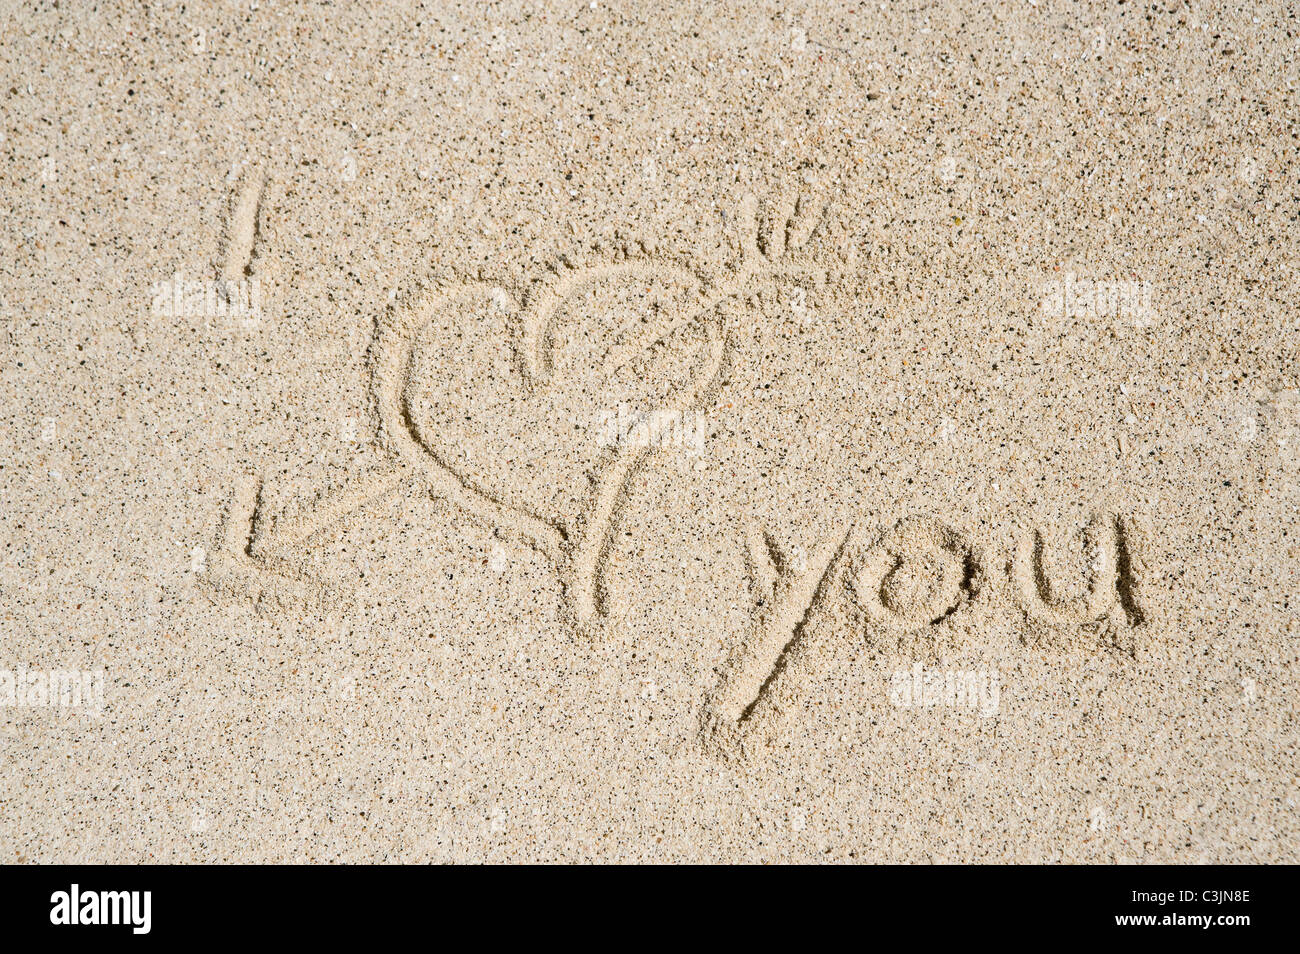 Asia, Indonesia, West Papua, Raja Ampat Islands, I love you text with heart shape written in Sand Stock Photo